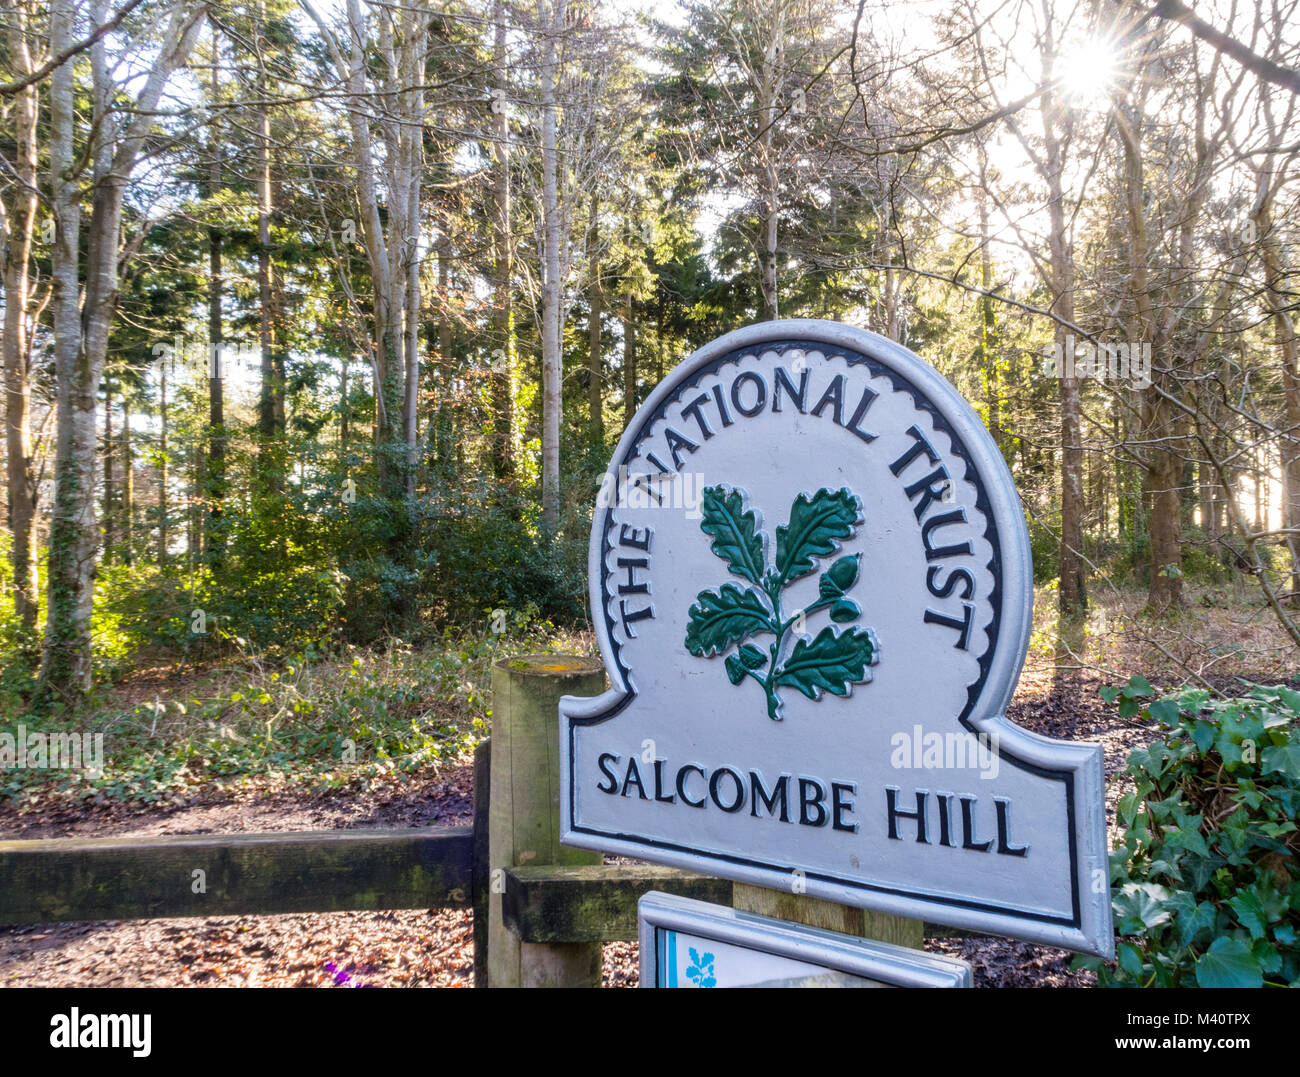 National Trust sign on the roadside at the entrance to woodland on Salcombe Hill, near Sidmouth, Devon. Stock Photo